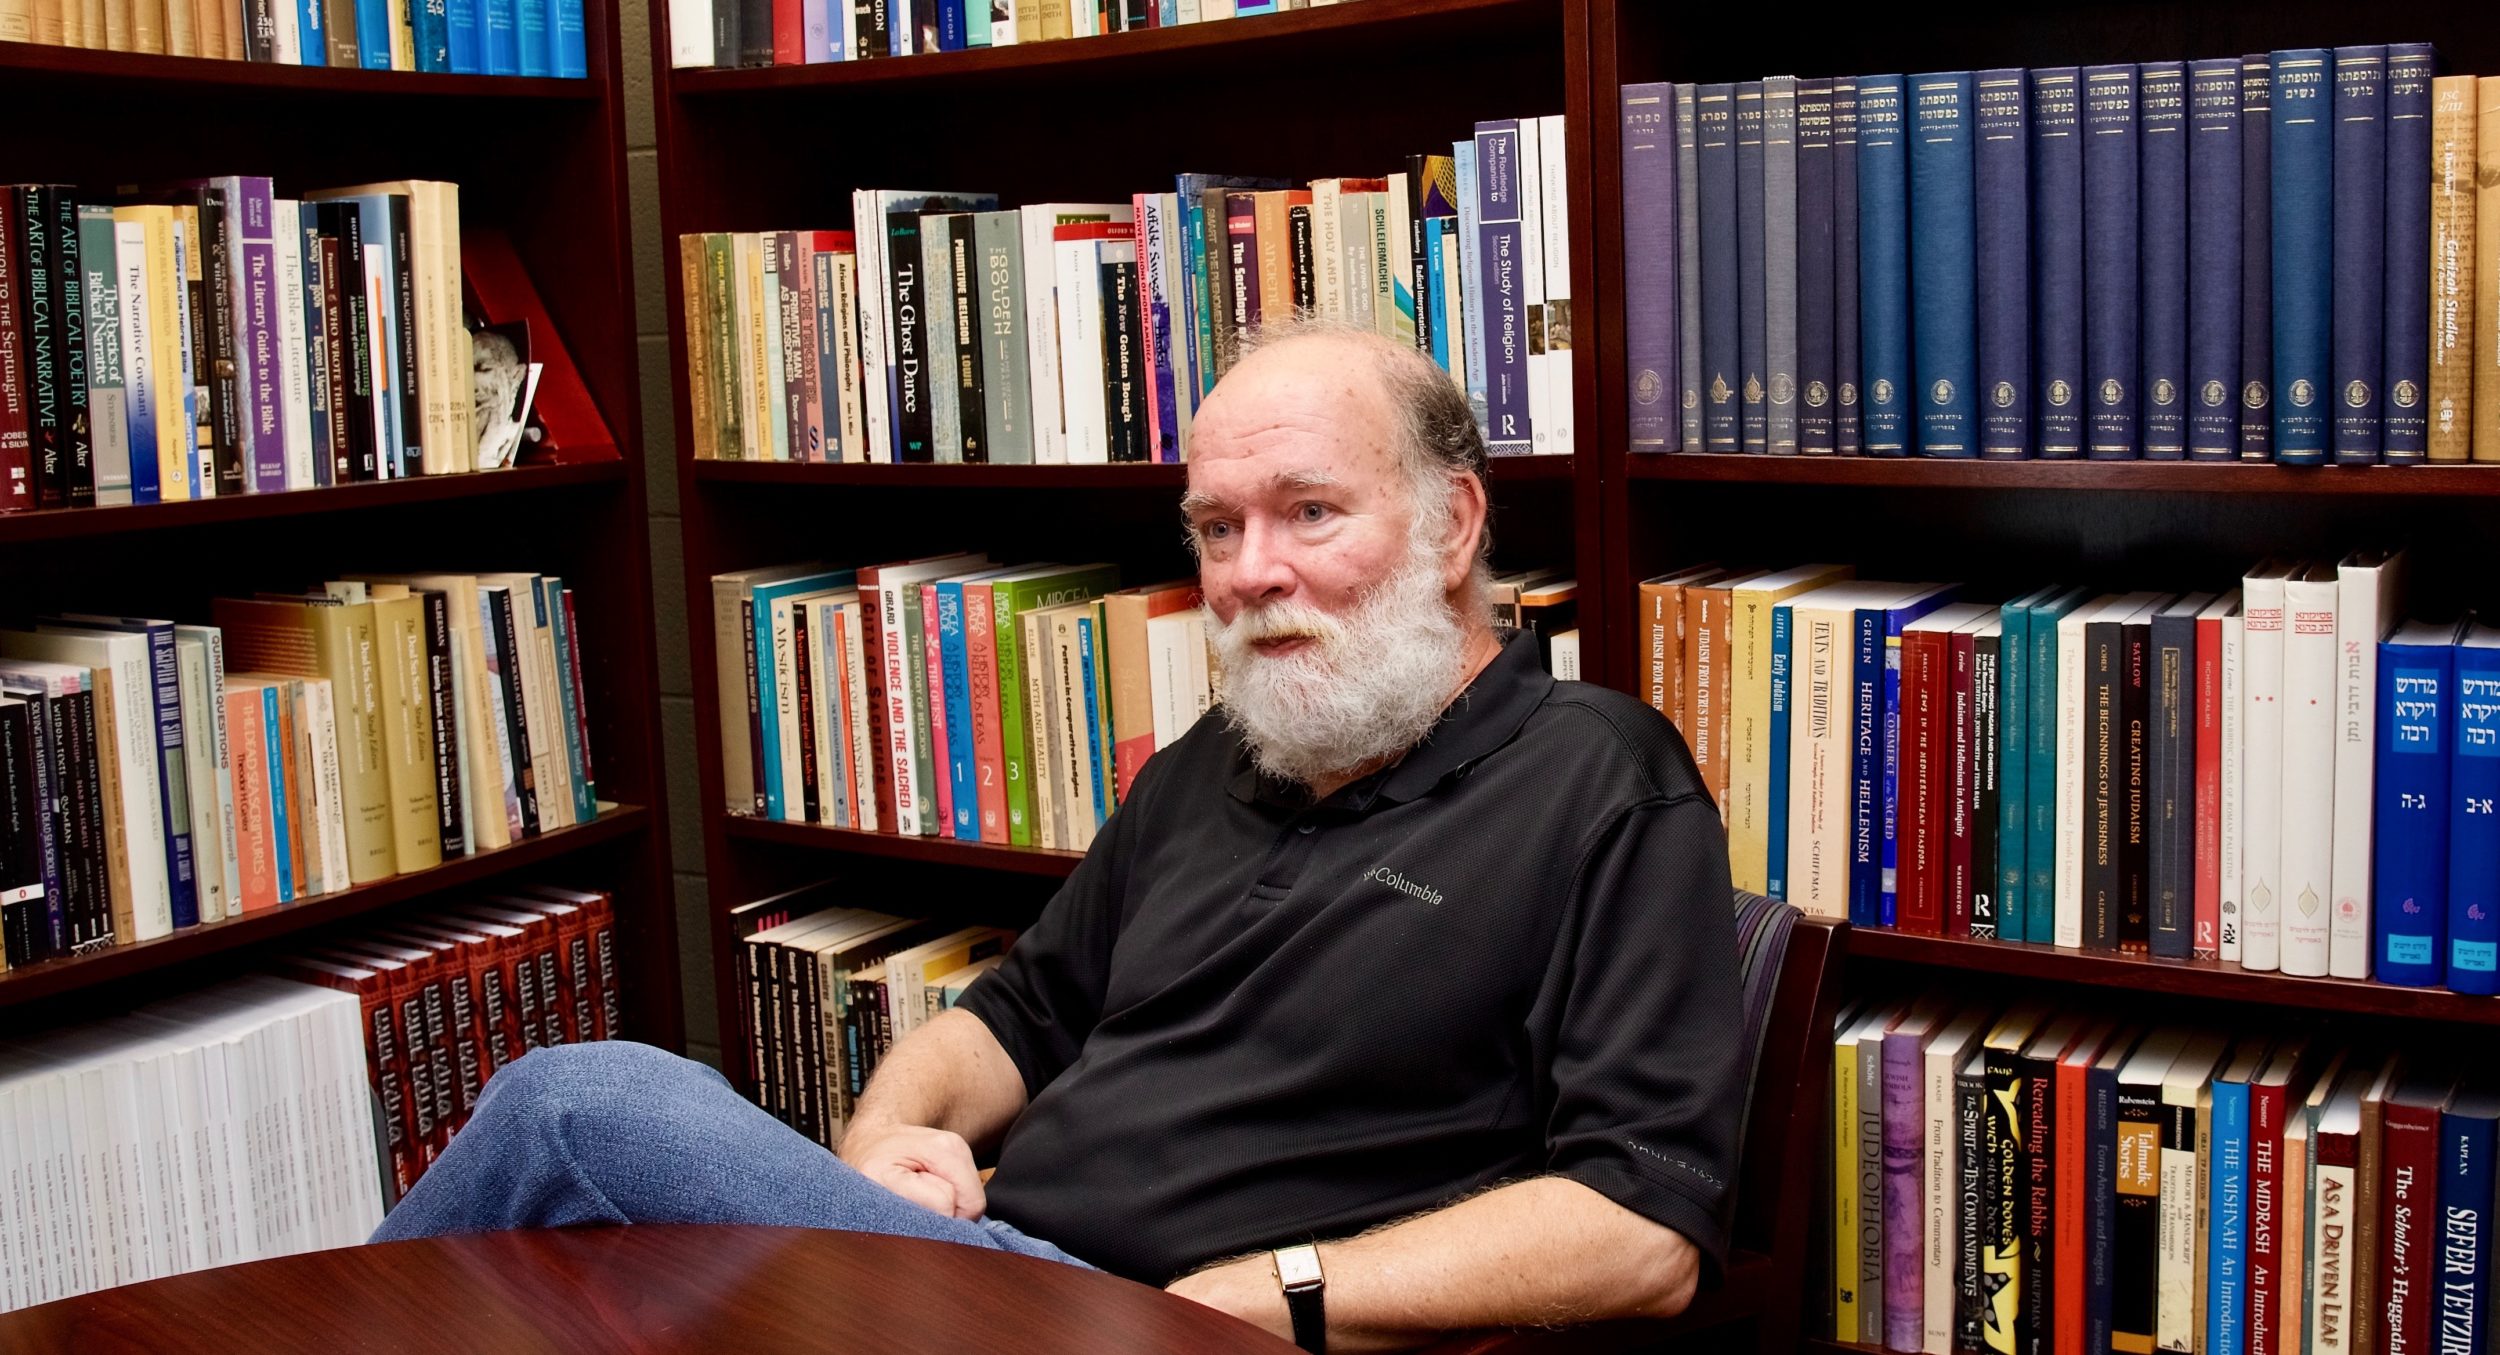 Reeves in his office with books